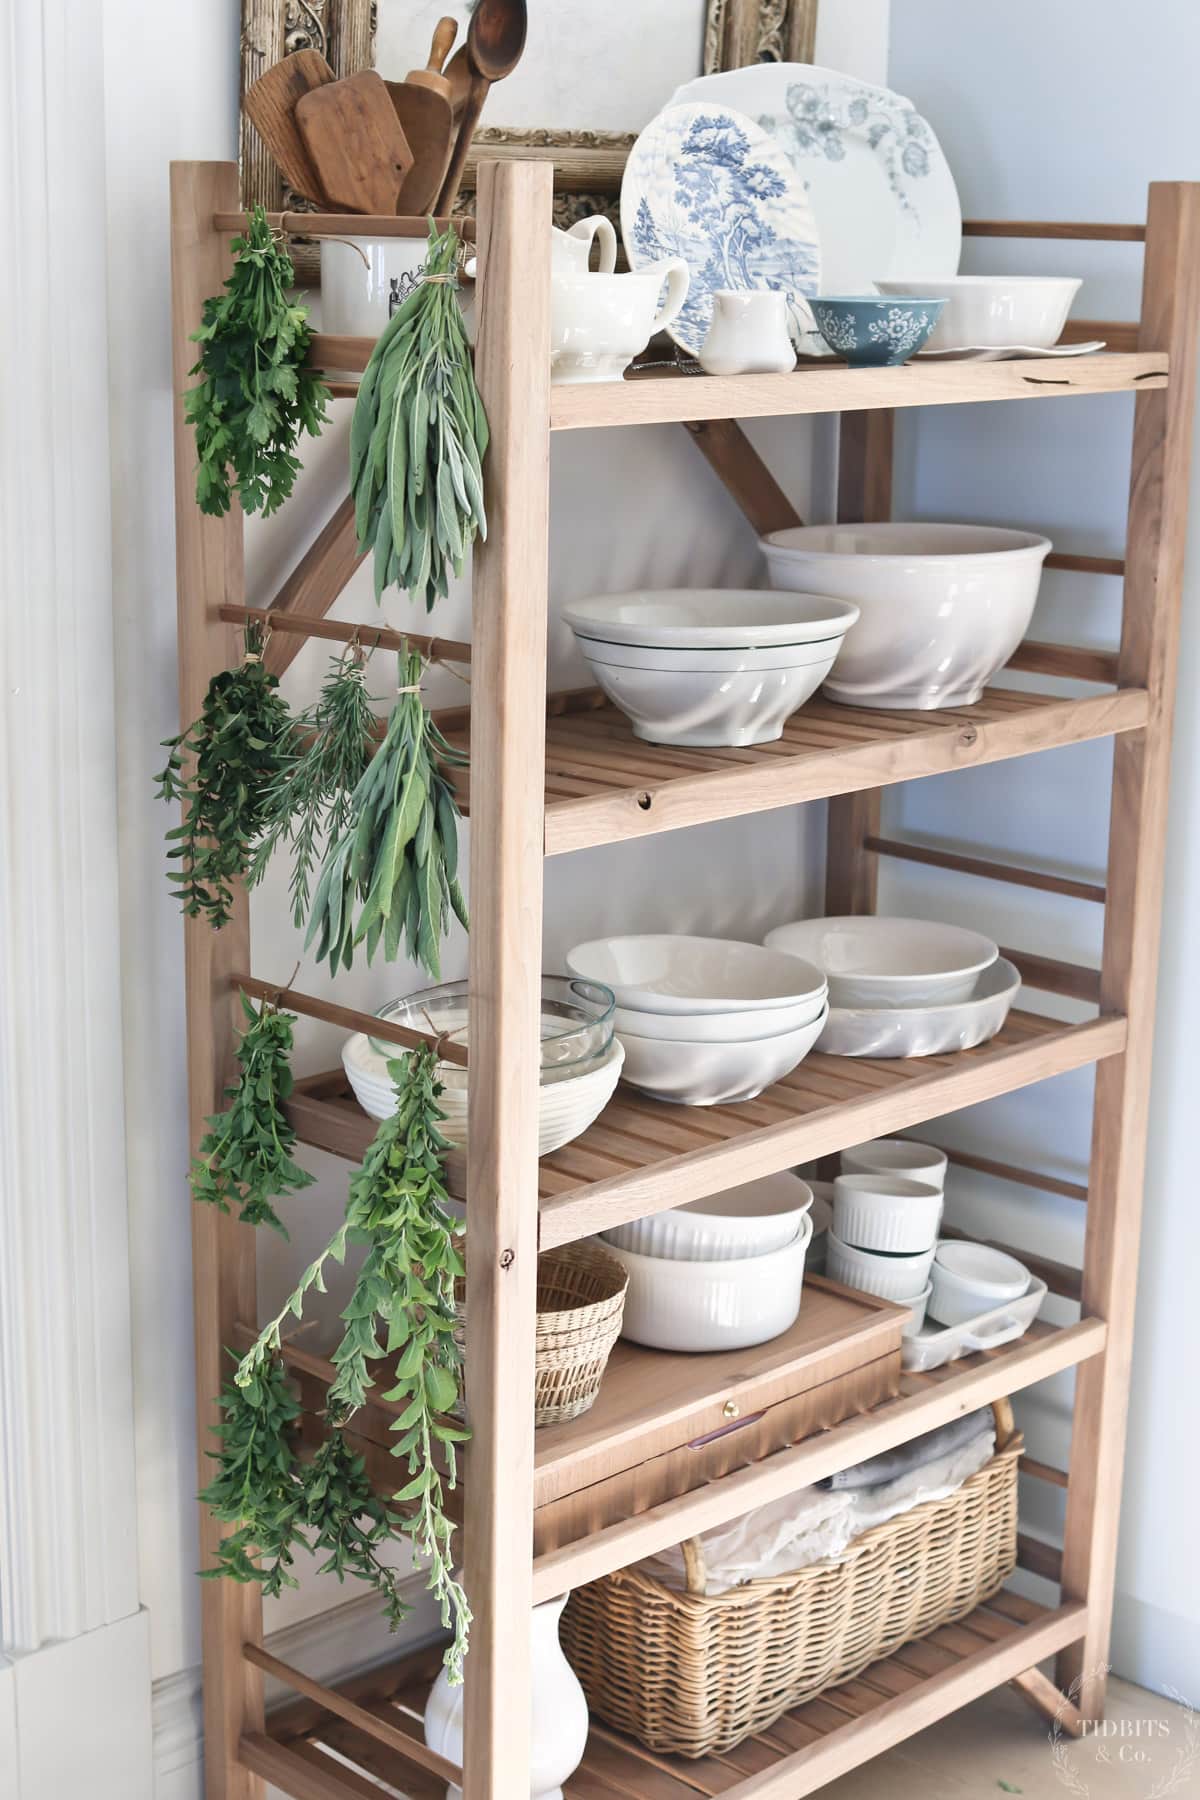 Bundles of herbs are tied to a wooden baker's rack